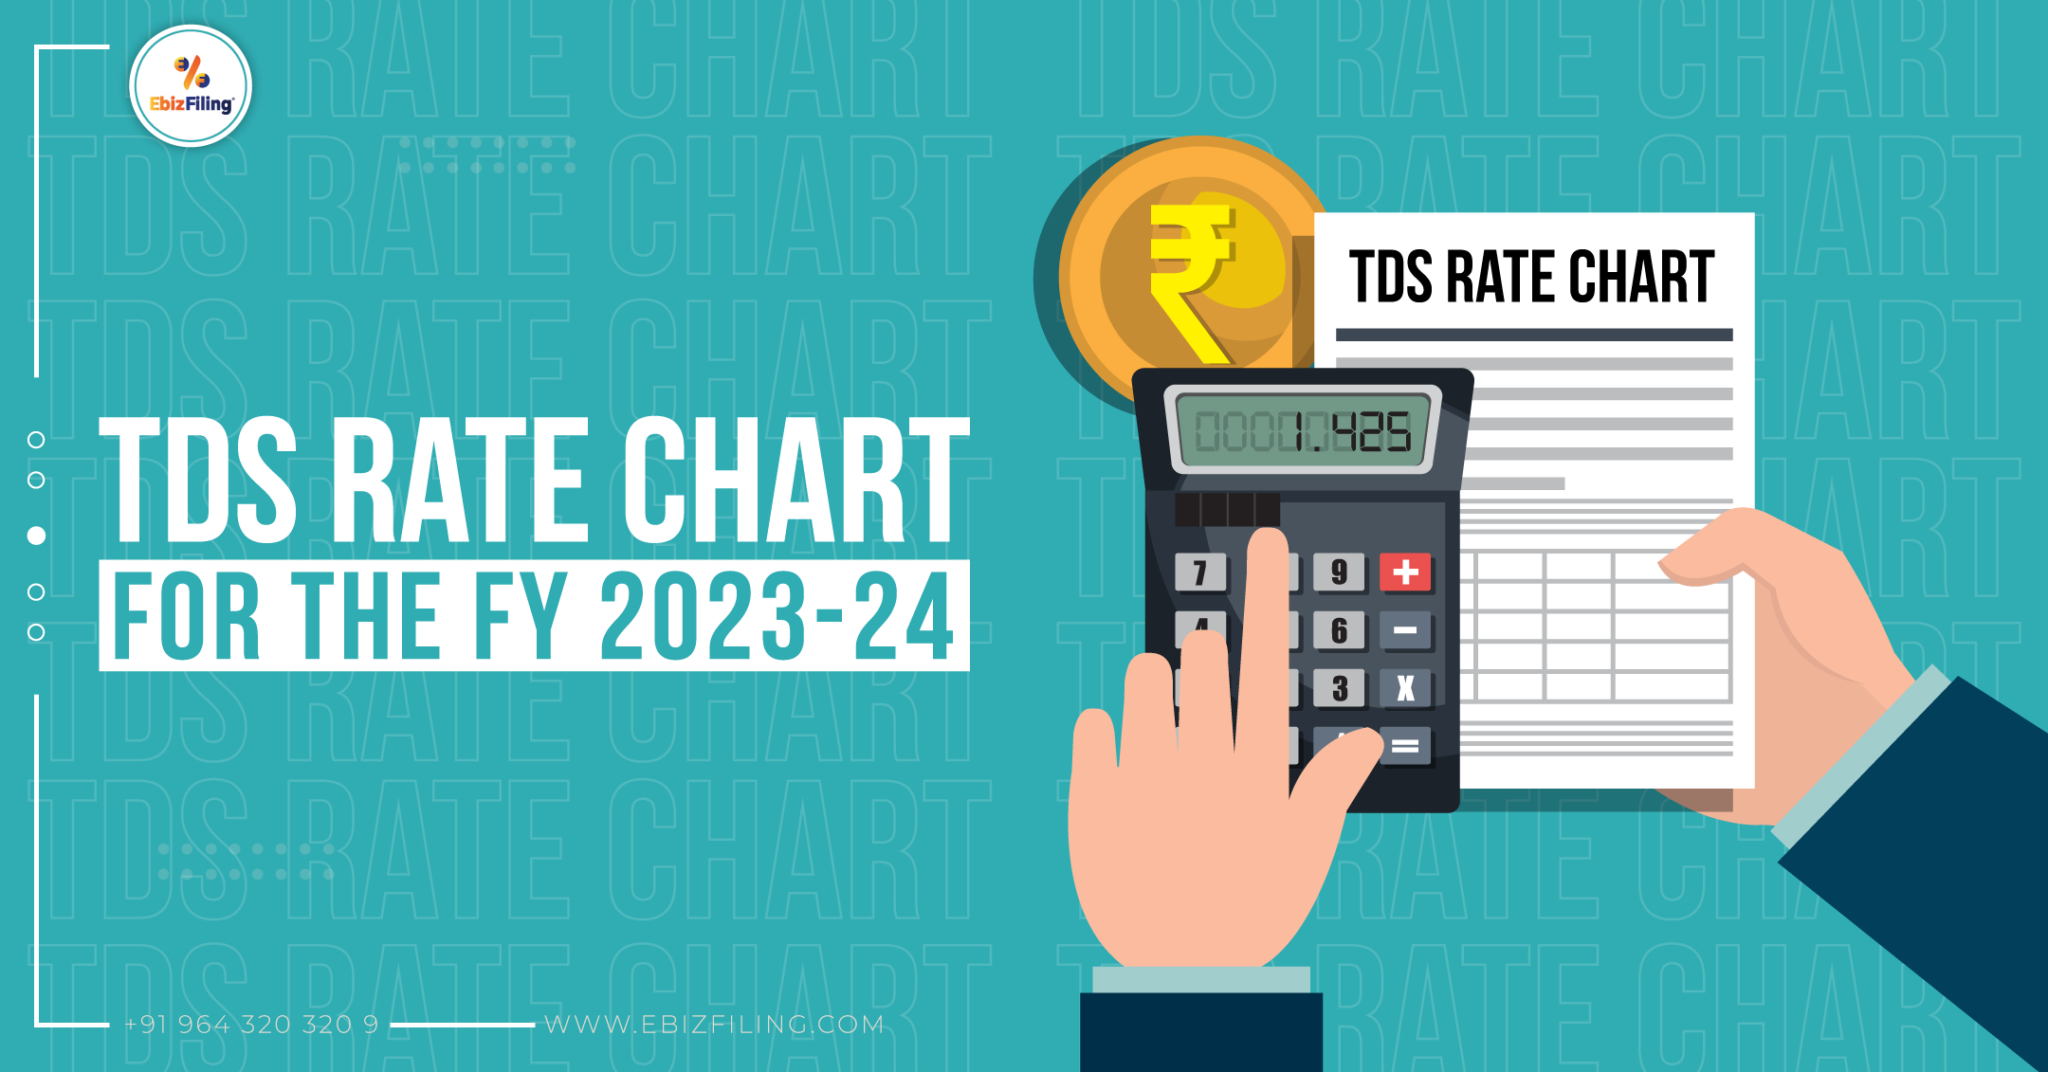 tds-rate-chart-for-the-fy-2023-24-ay-2024-25-bresdel